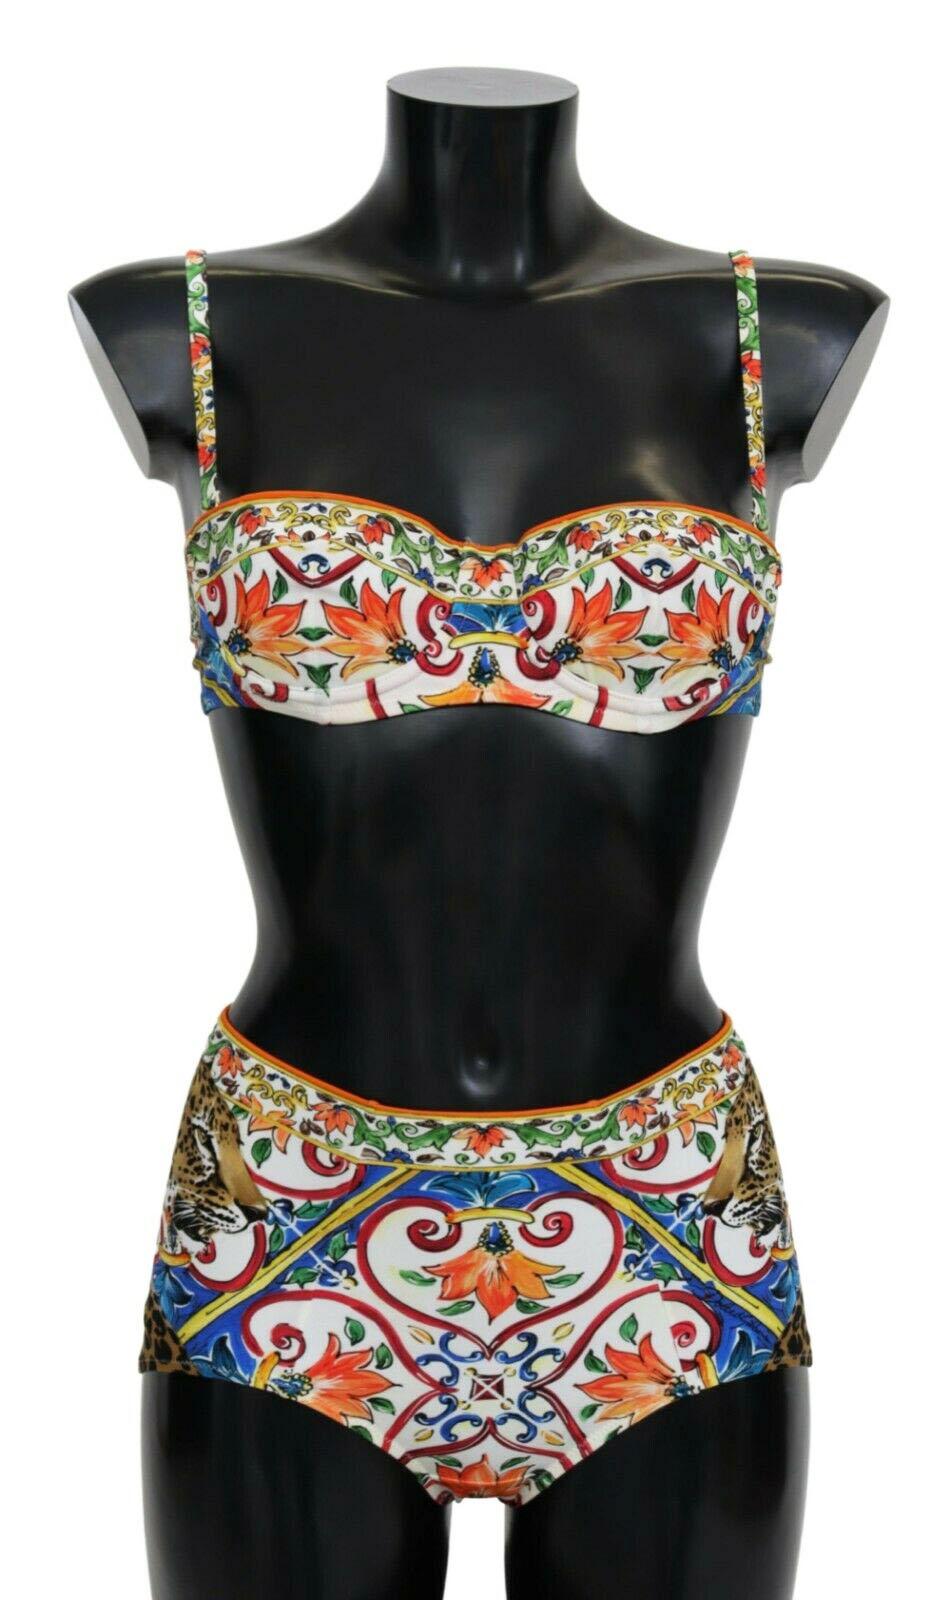 Gorgeous brand new with tags, 100% Authentic Dolce & Gabbana two piece bikini with majolica print.




Color: Multicolor Majolica print

Model: Bikini two piece set, top and bottom

Material: 75% Nylon 25% Elastane

Logo detailing

Made in